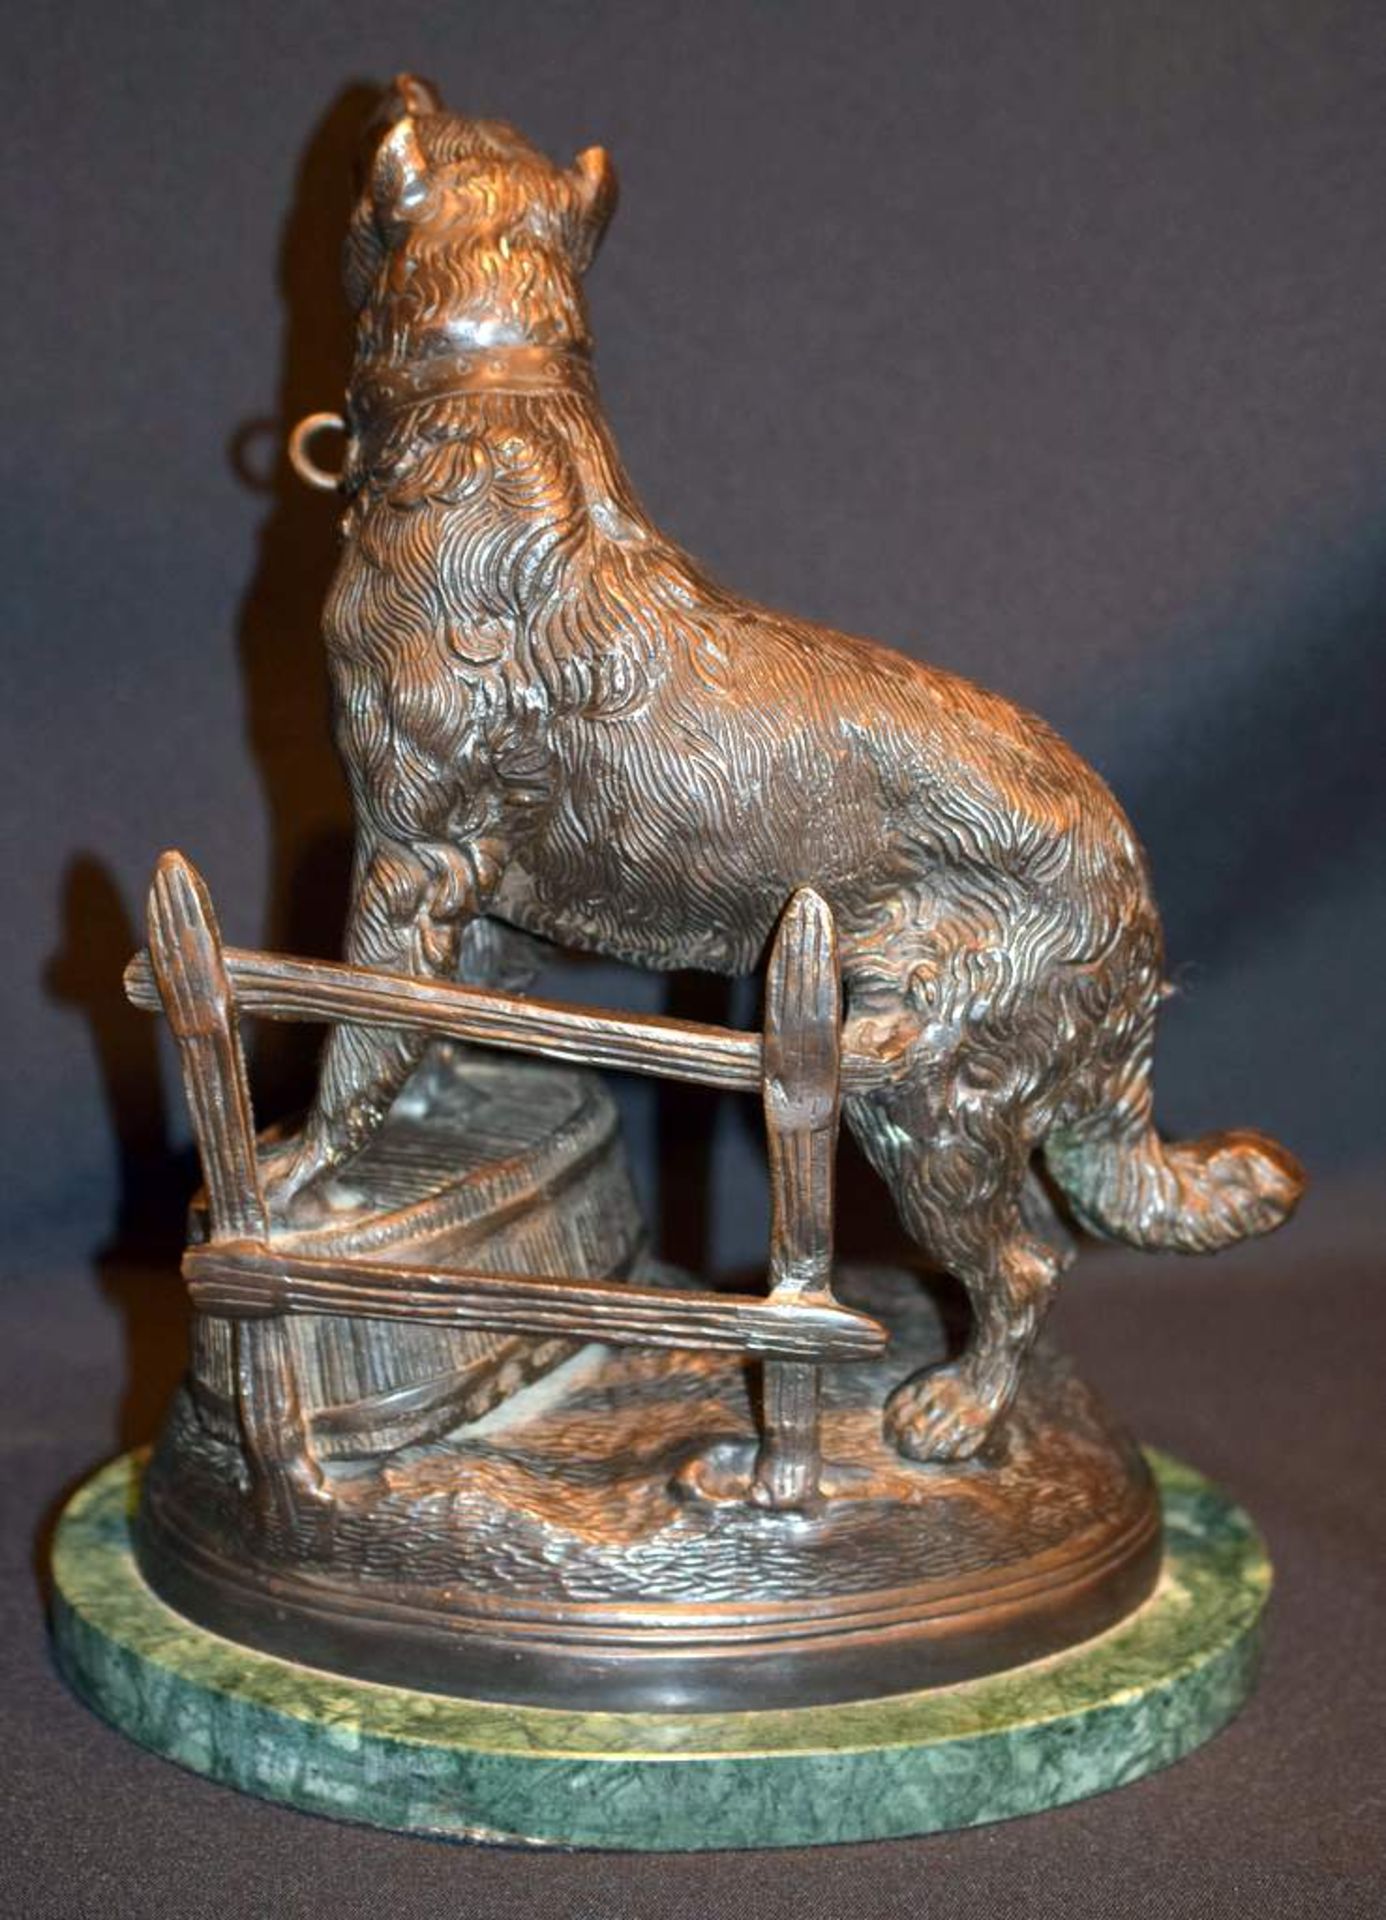 Bronze Sculpture Of Mastiff Dog Tied To Fence - Image 4 of 4